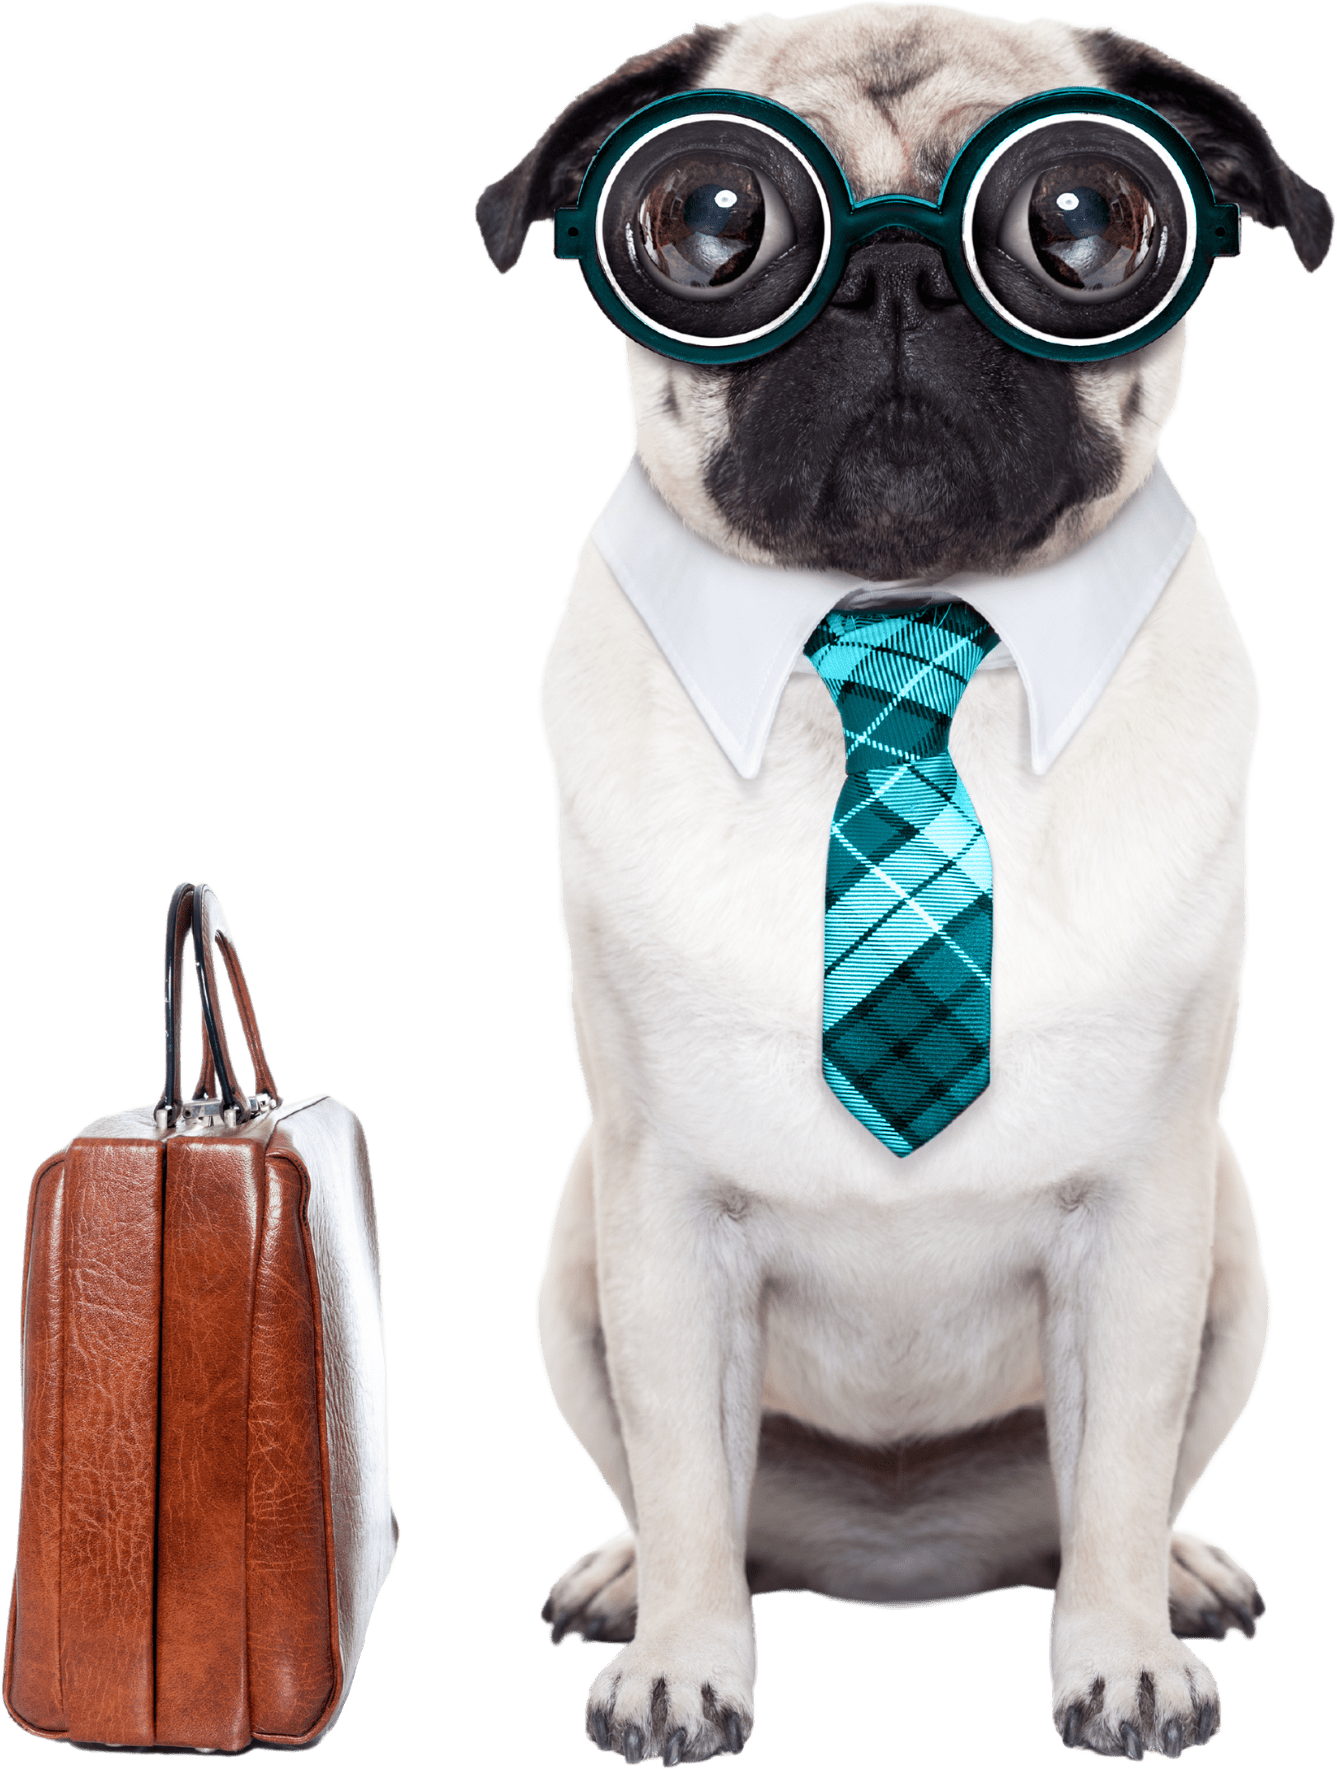 A pug with turquoise coke-bottle glasses wears a white collar with plaid turquoise necktie. Beside the dog is a brown leather briefcase.